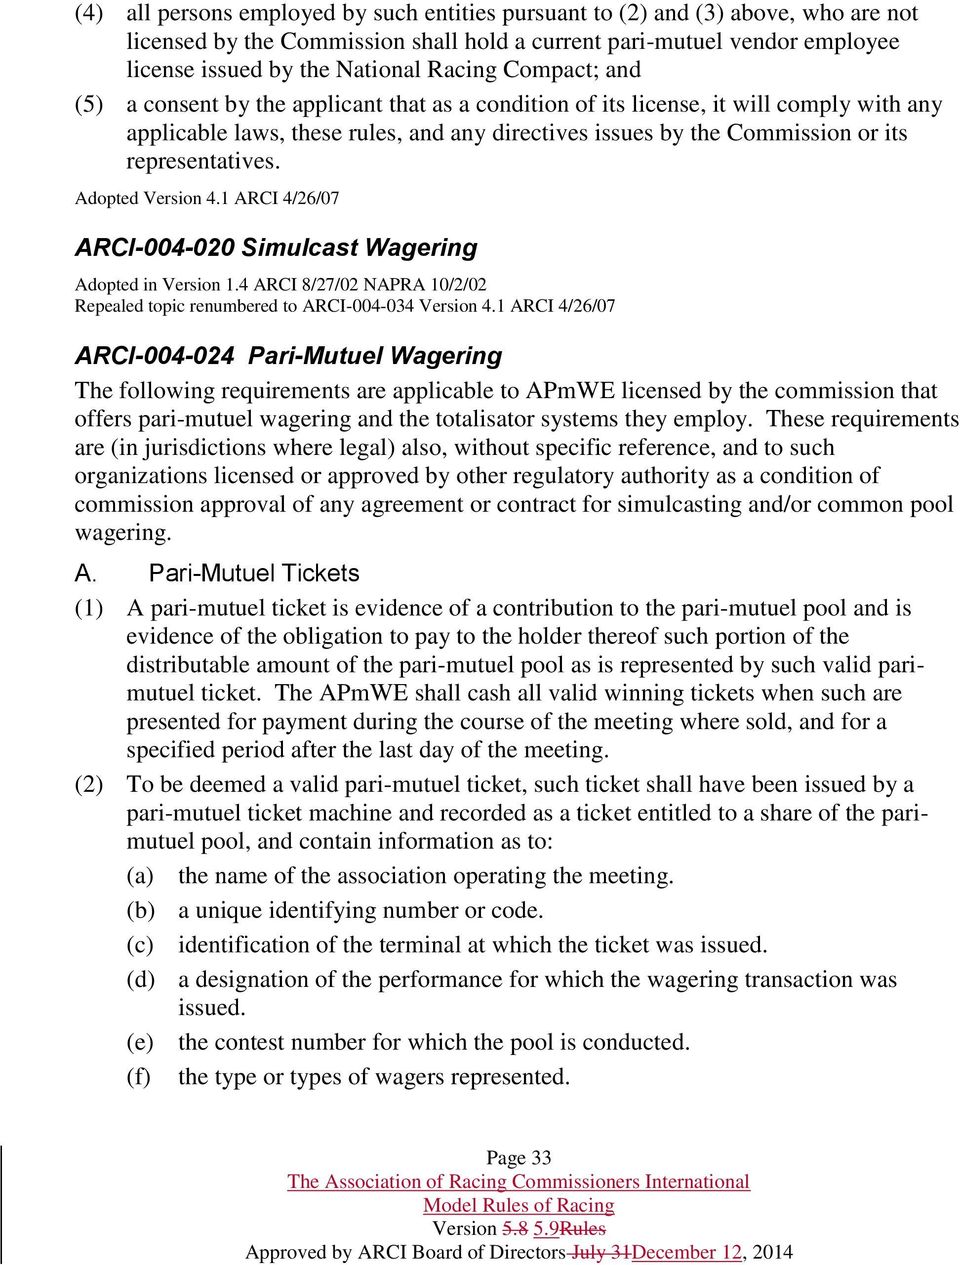 representatives. Adopted Version 4.1 ARCI 4/26/07 ARCI-004-020 Simulcast Wagering Adopted in Version 1.4 ARCI 8/27/02 NAPRA 10/2/02 Repealed topic renumbered to ARCI-004-034 Version 4.